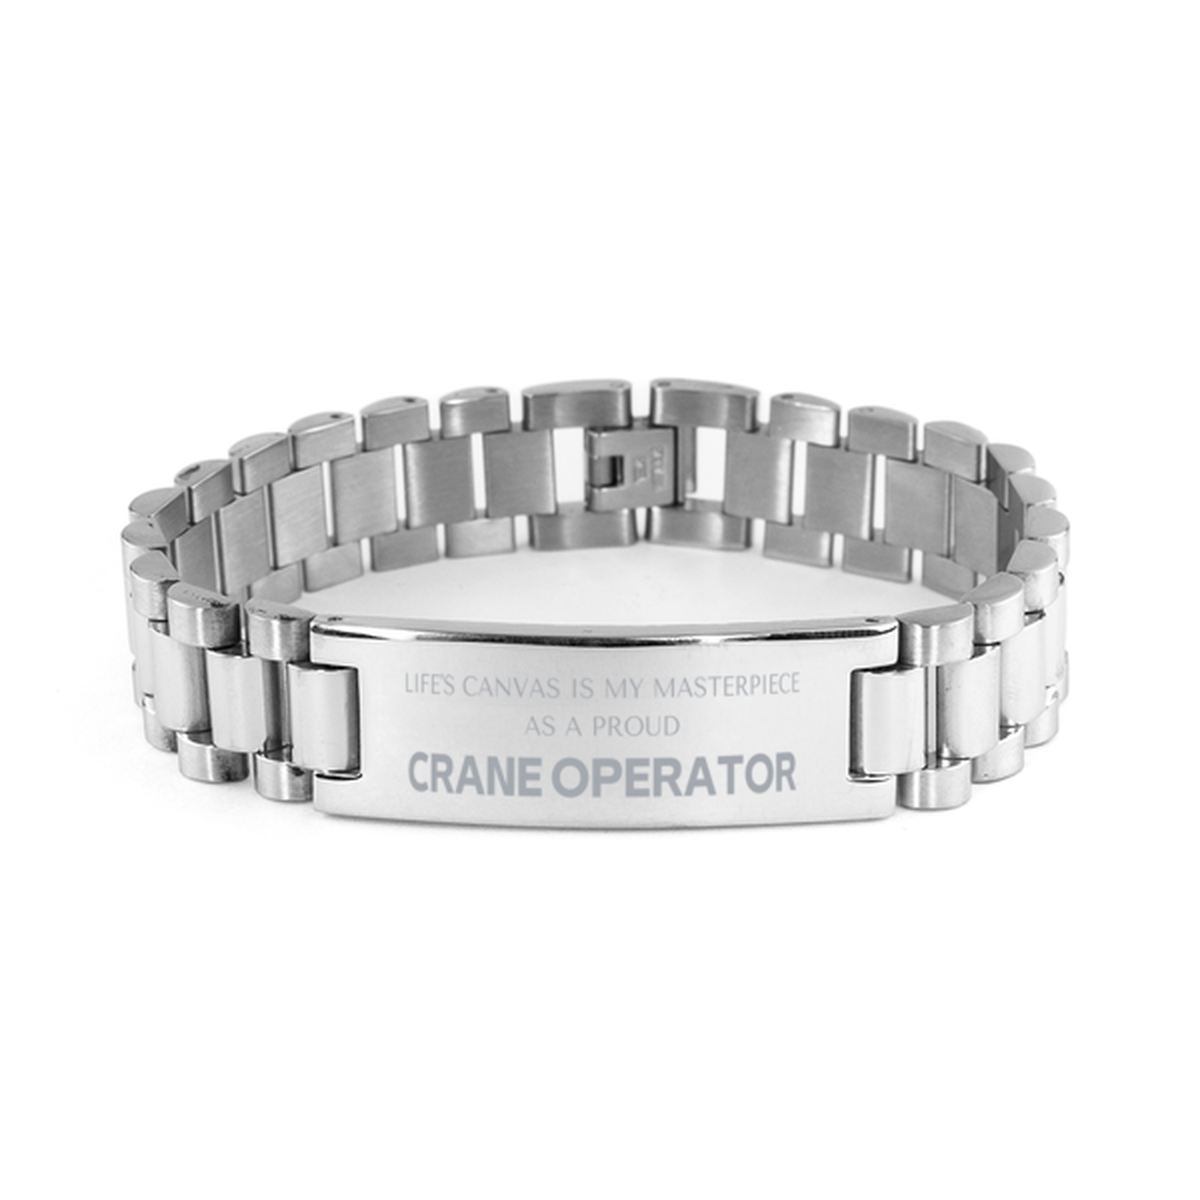 Proud Crane Operator Gifts, Life's canvas is my masterpiece, Epic Birthday Christmas Unique Ladder Stainless Steel Bracelet For Crane Operator, Coworkers, Men, Women, Friends